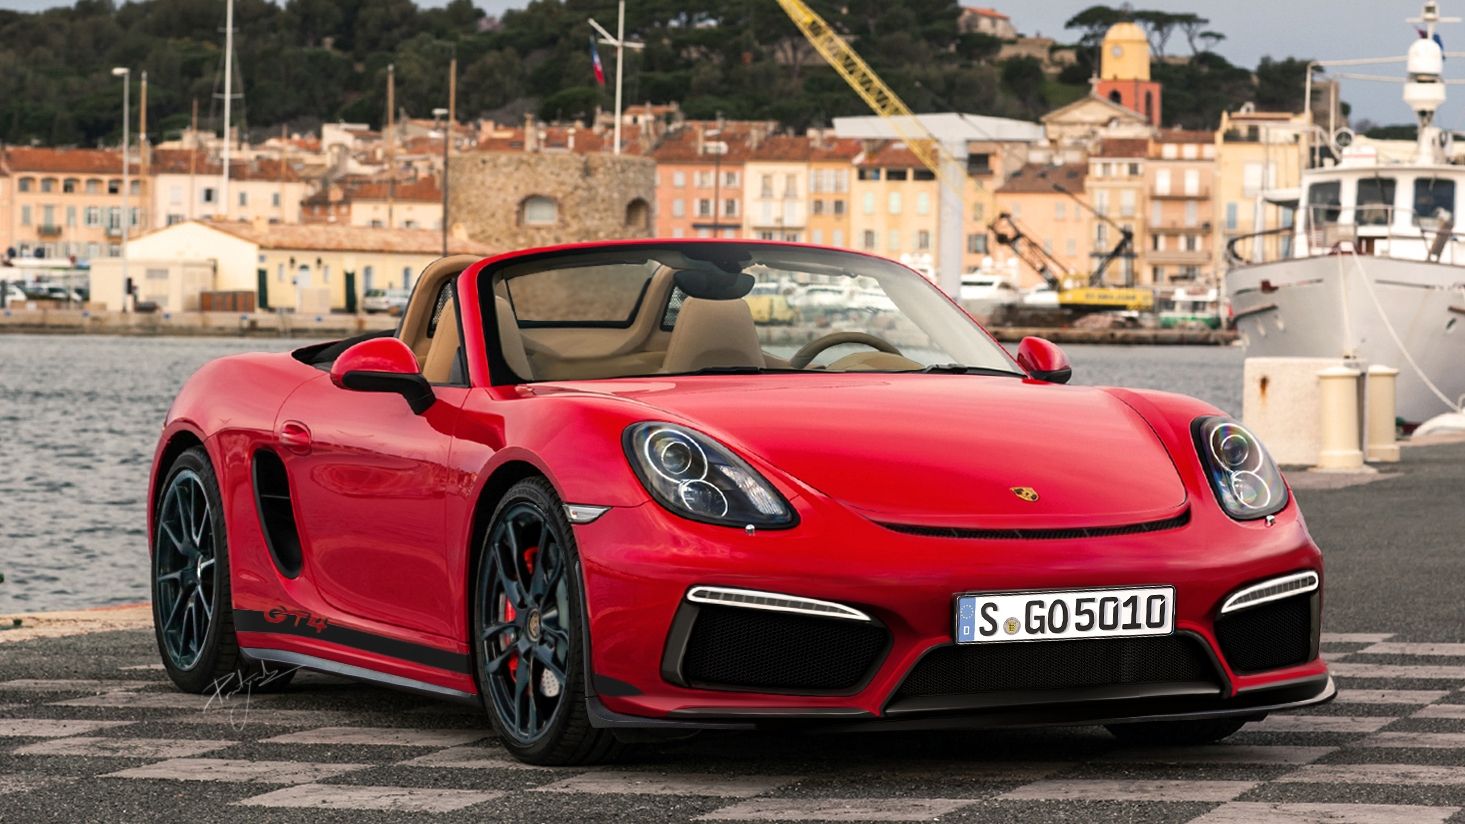  We've created an all-new rendering for the upcoming Porsche Boxster GT4; check it out at TopSpeed.com.